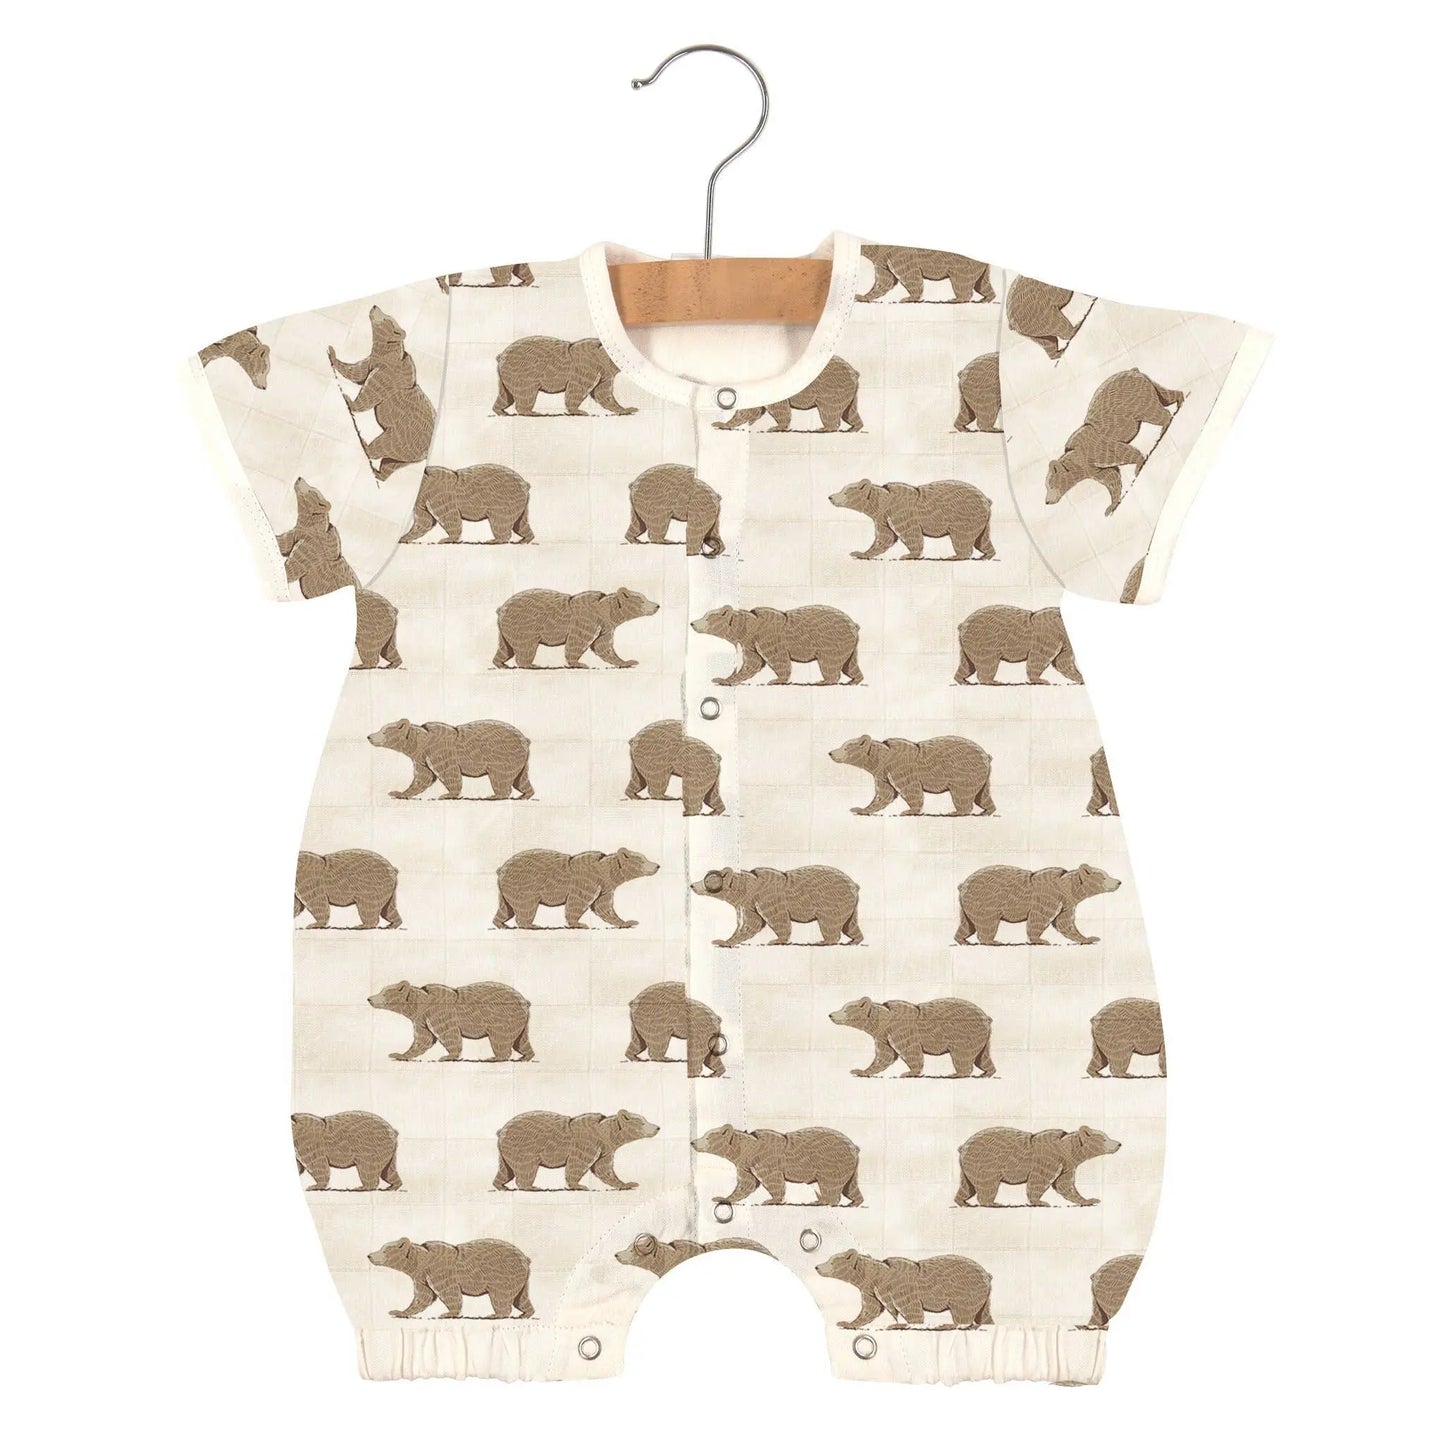 The Tiny Details Goodnight, Bear Bamboo Baby Romper